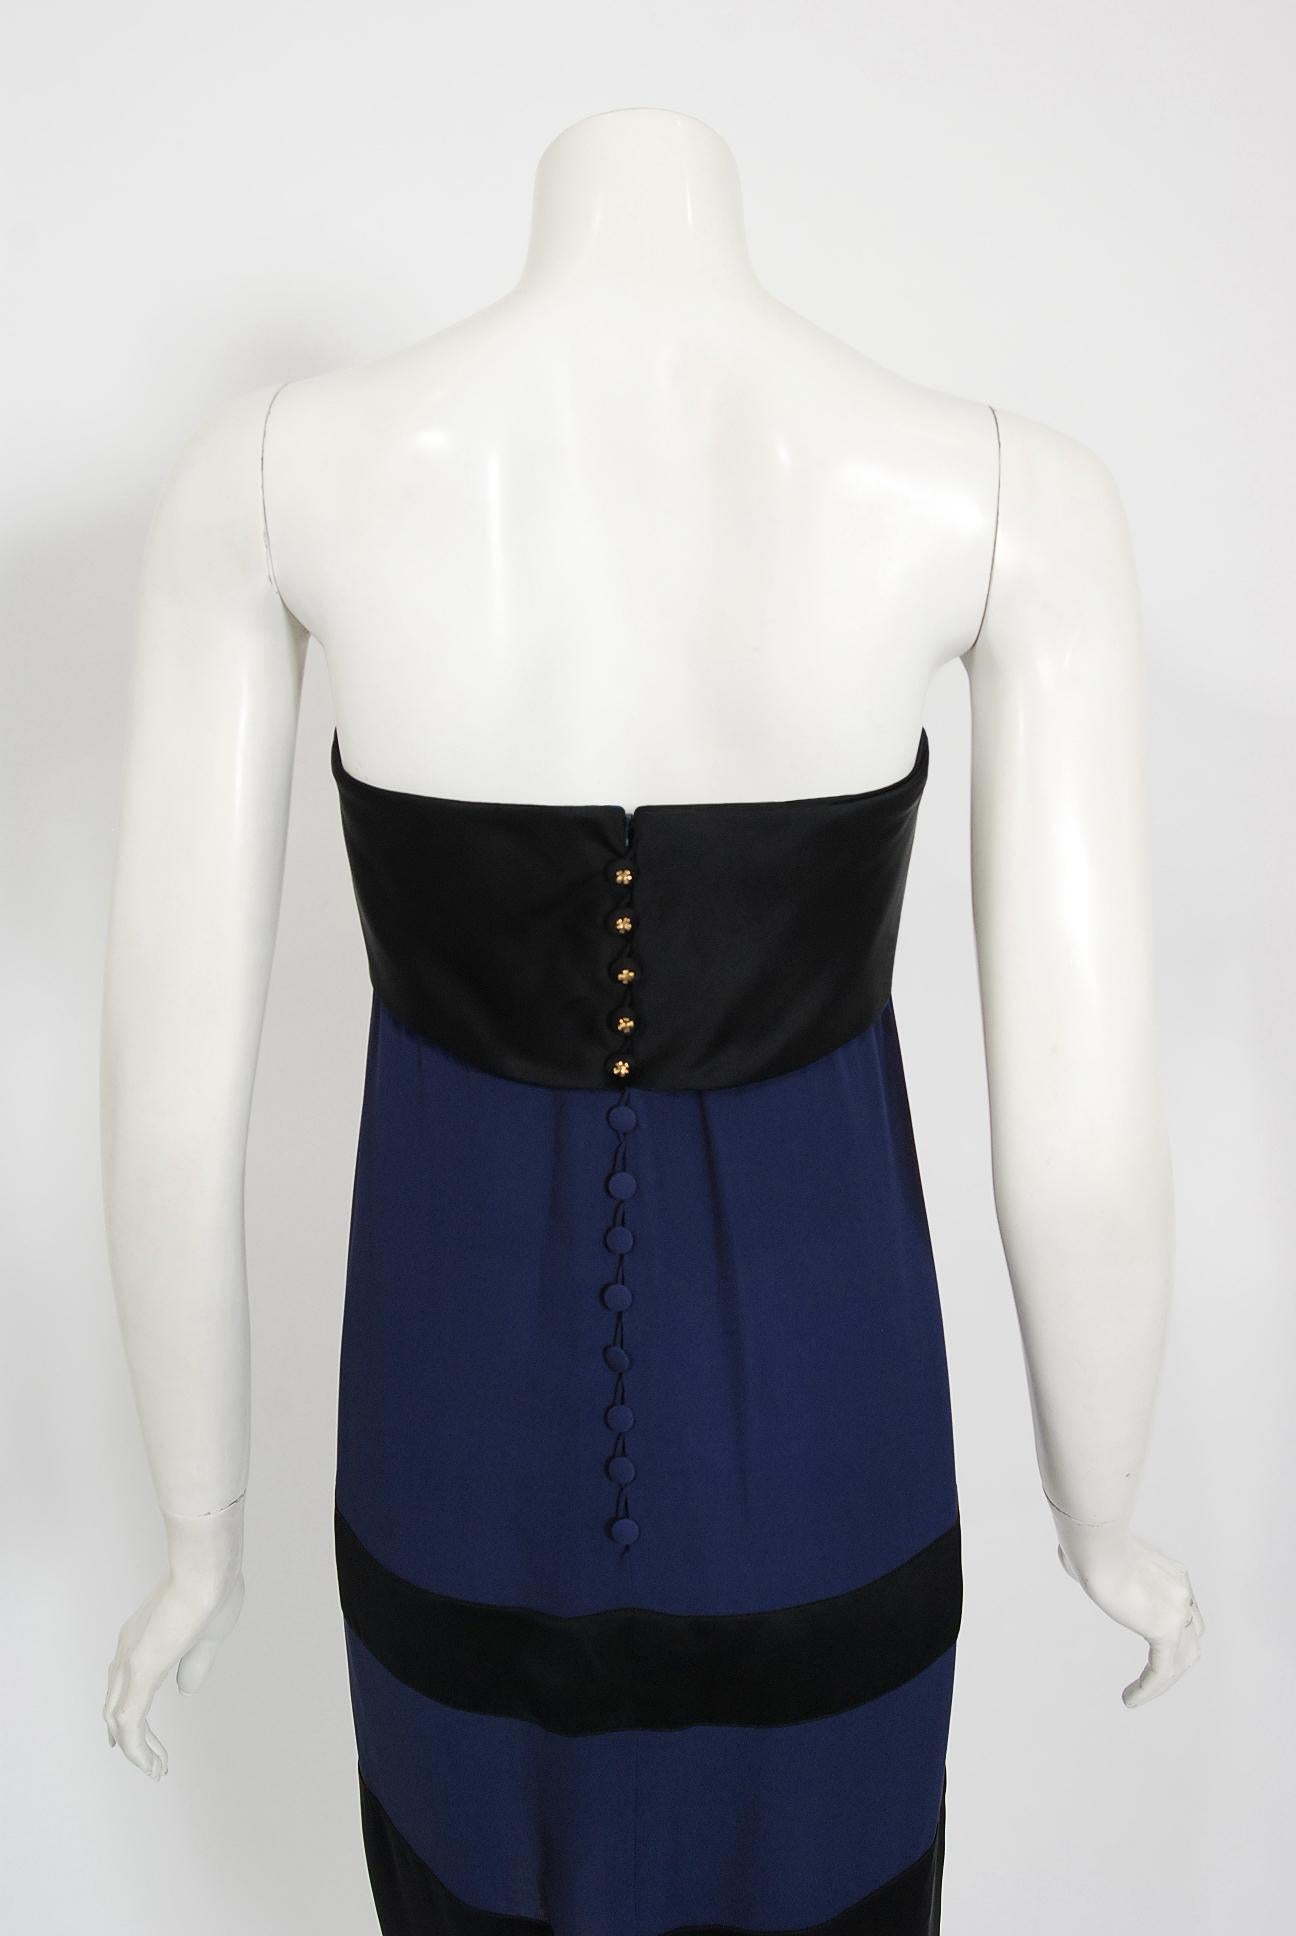 Vintage 1990 Chanel by Karl Lagerfeld Documented Silk Strapless Dress w/ Shawl For Sale 3